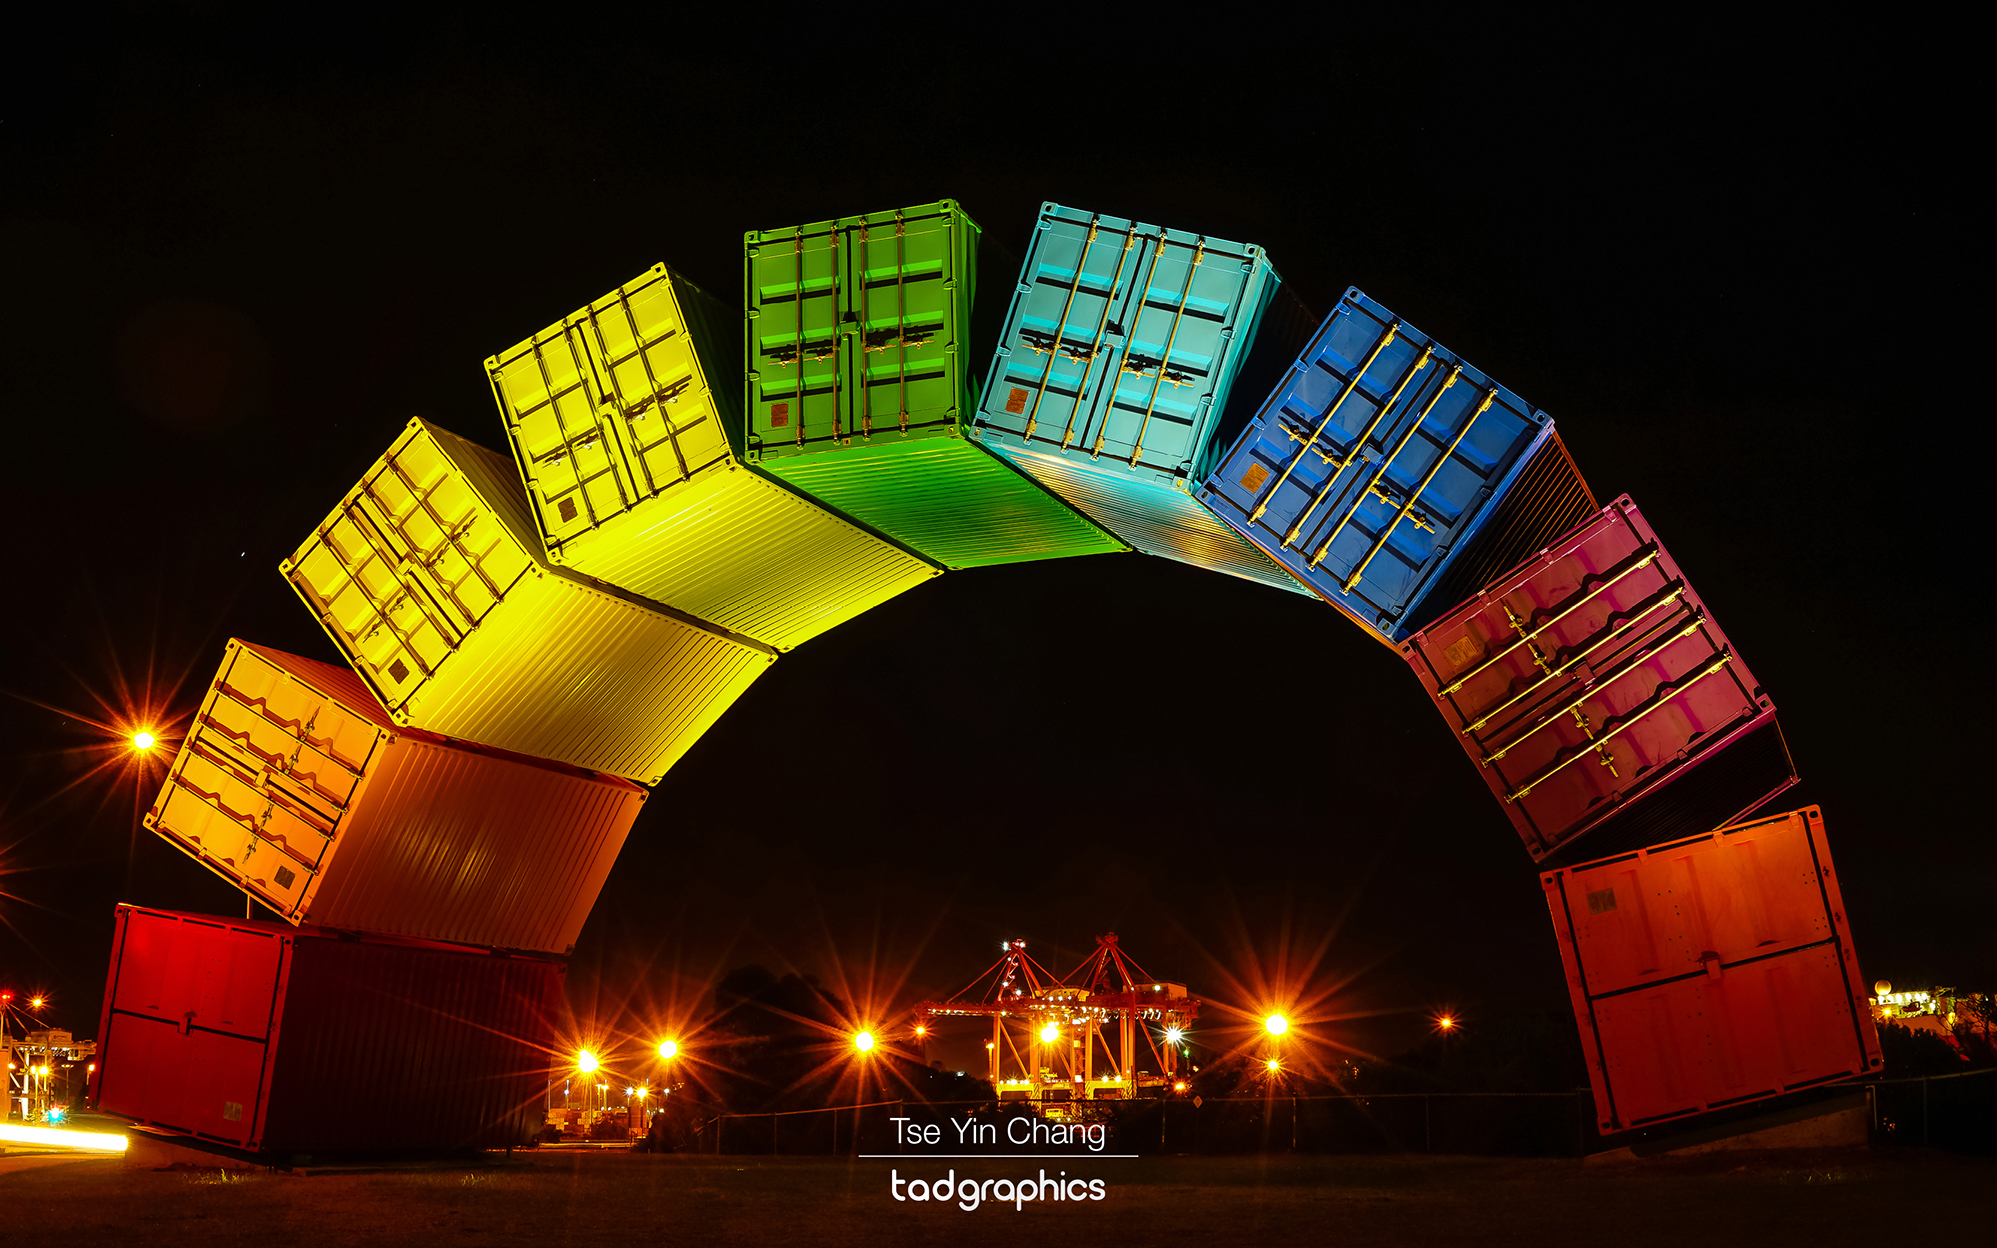 The ‘Rainbow’ sculpture by Marcus Canning at Beach Reserve overlooking the Fremantle Port